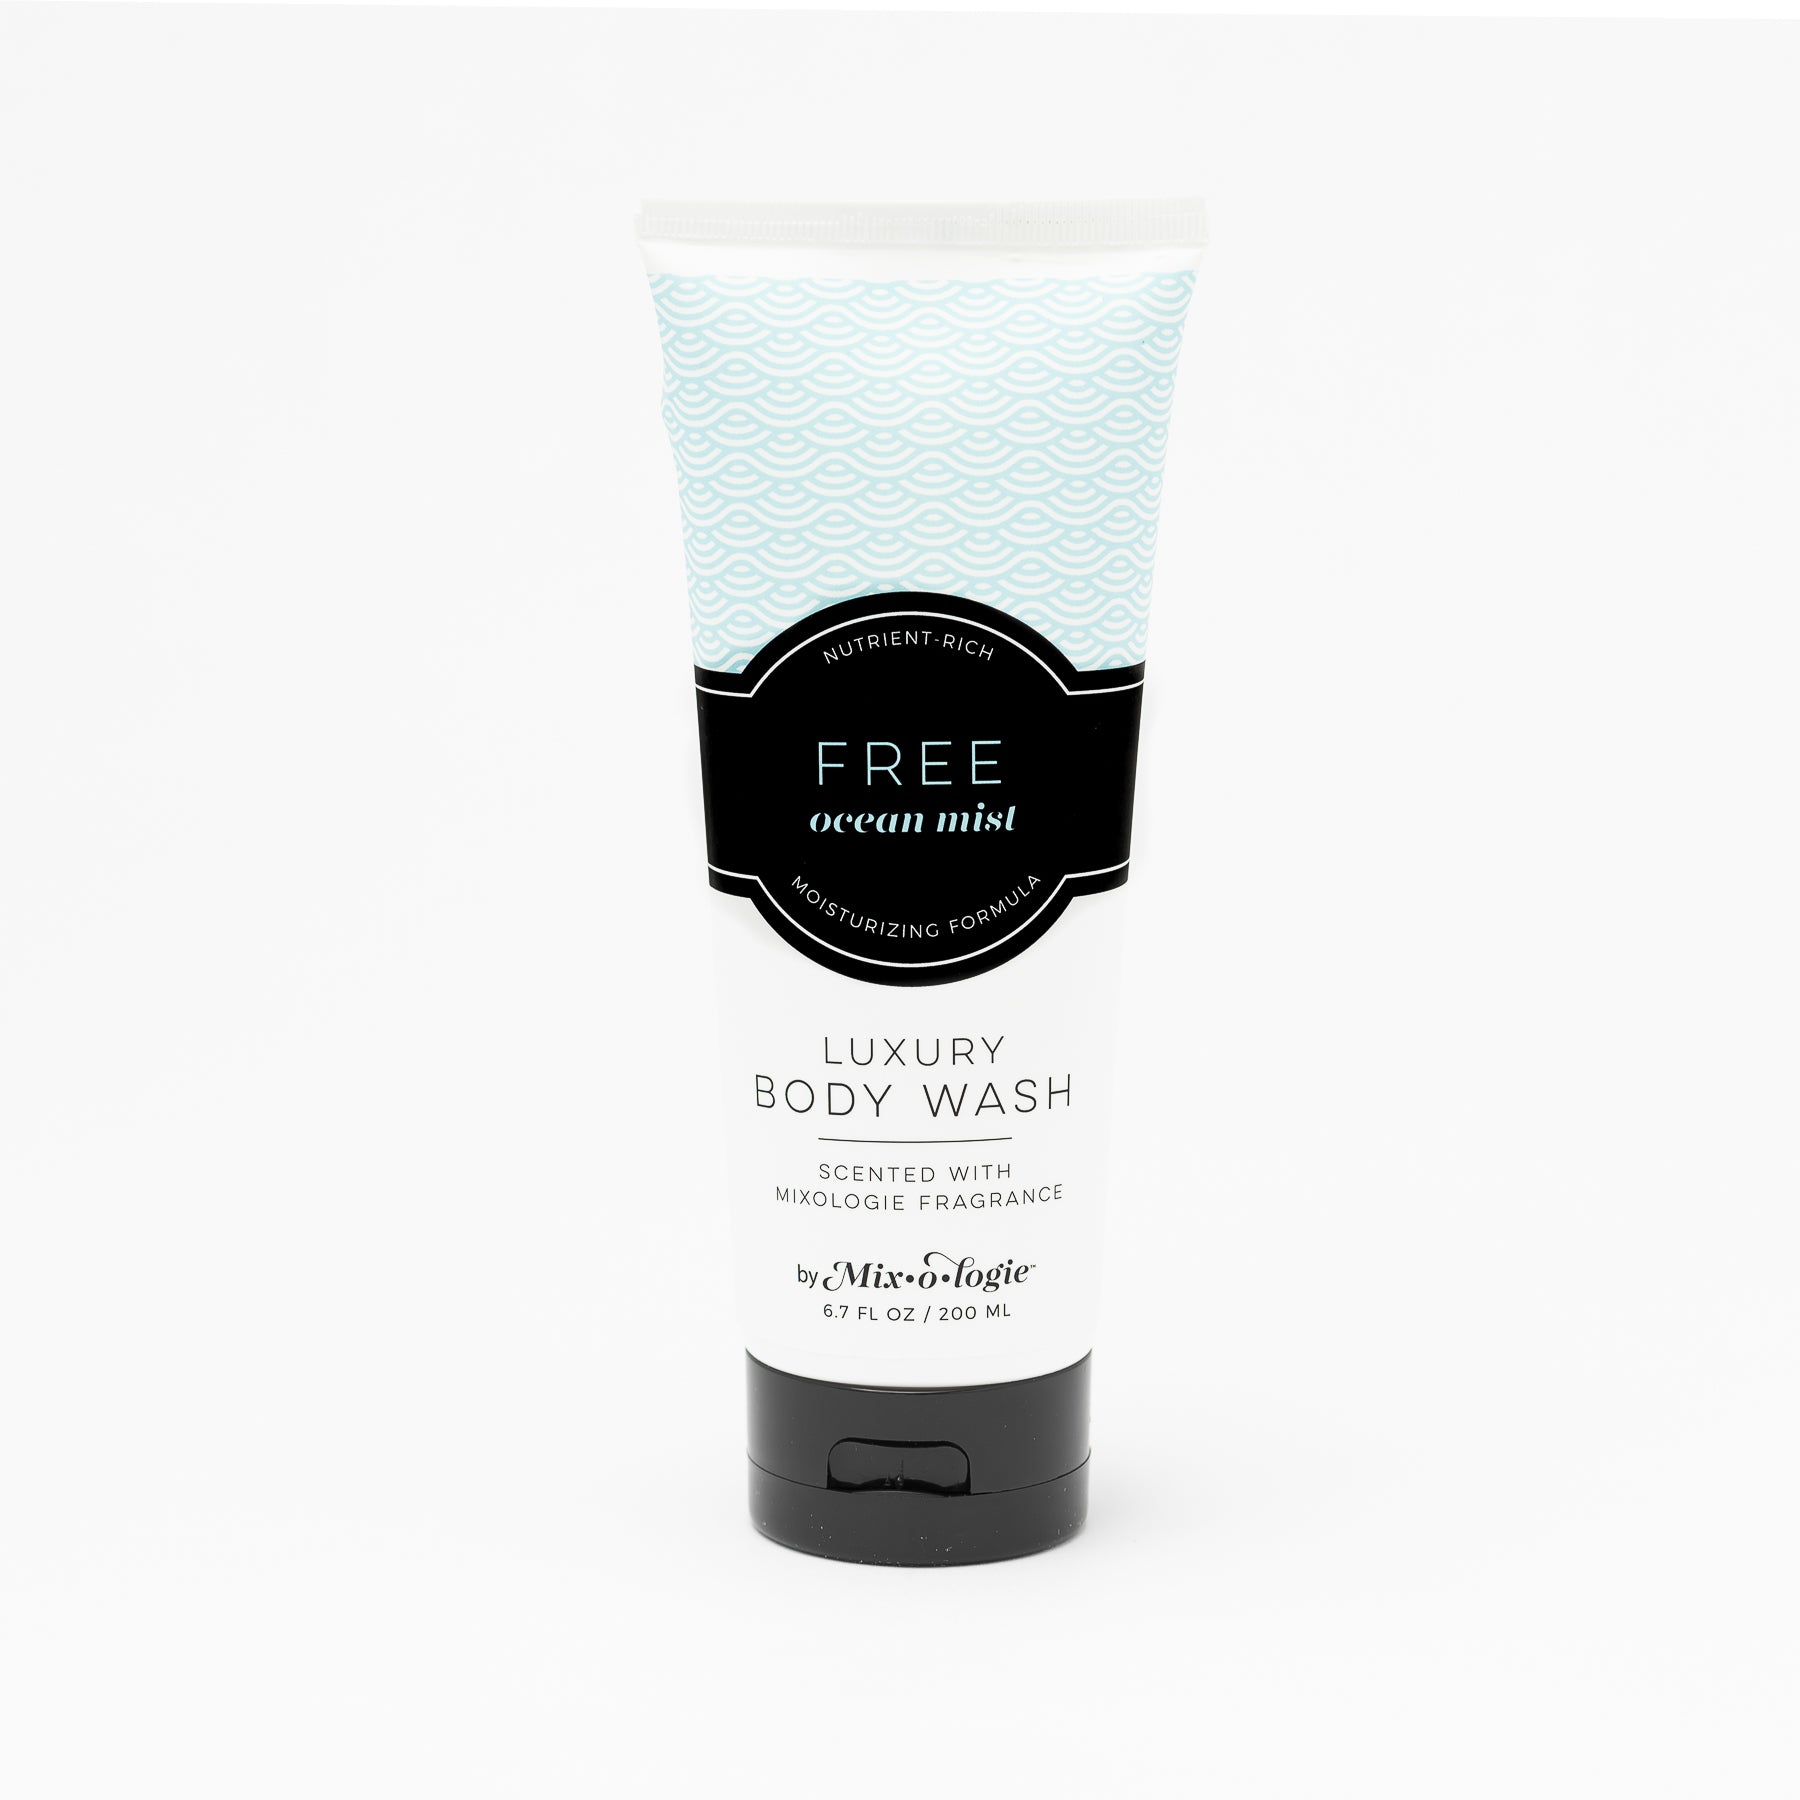 Luxury Body Wash in Mixologie’s Free (Ocean Mist) in light blue color sample package with black label. Contains 6.7 fl oz or 200 mL pictured on a white background